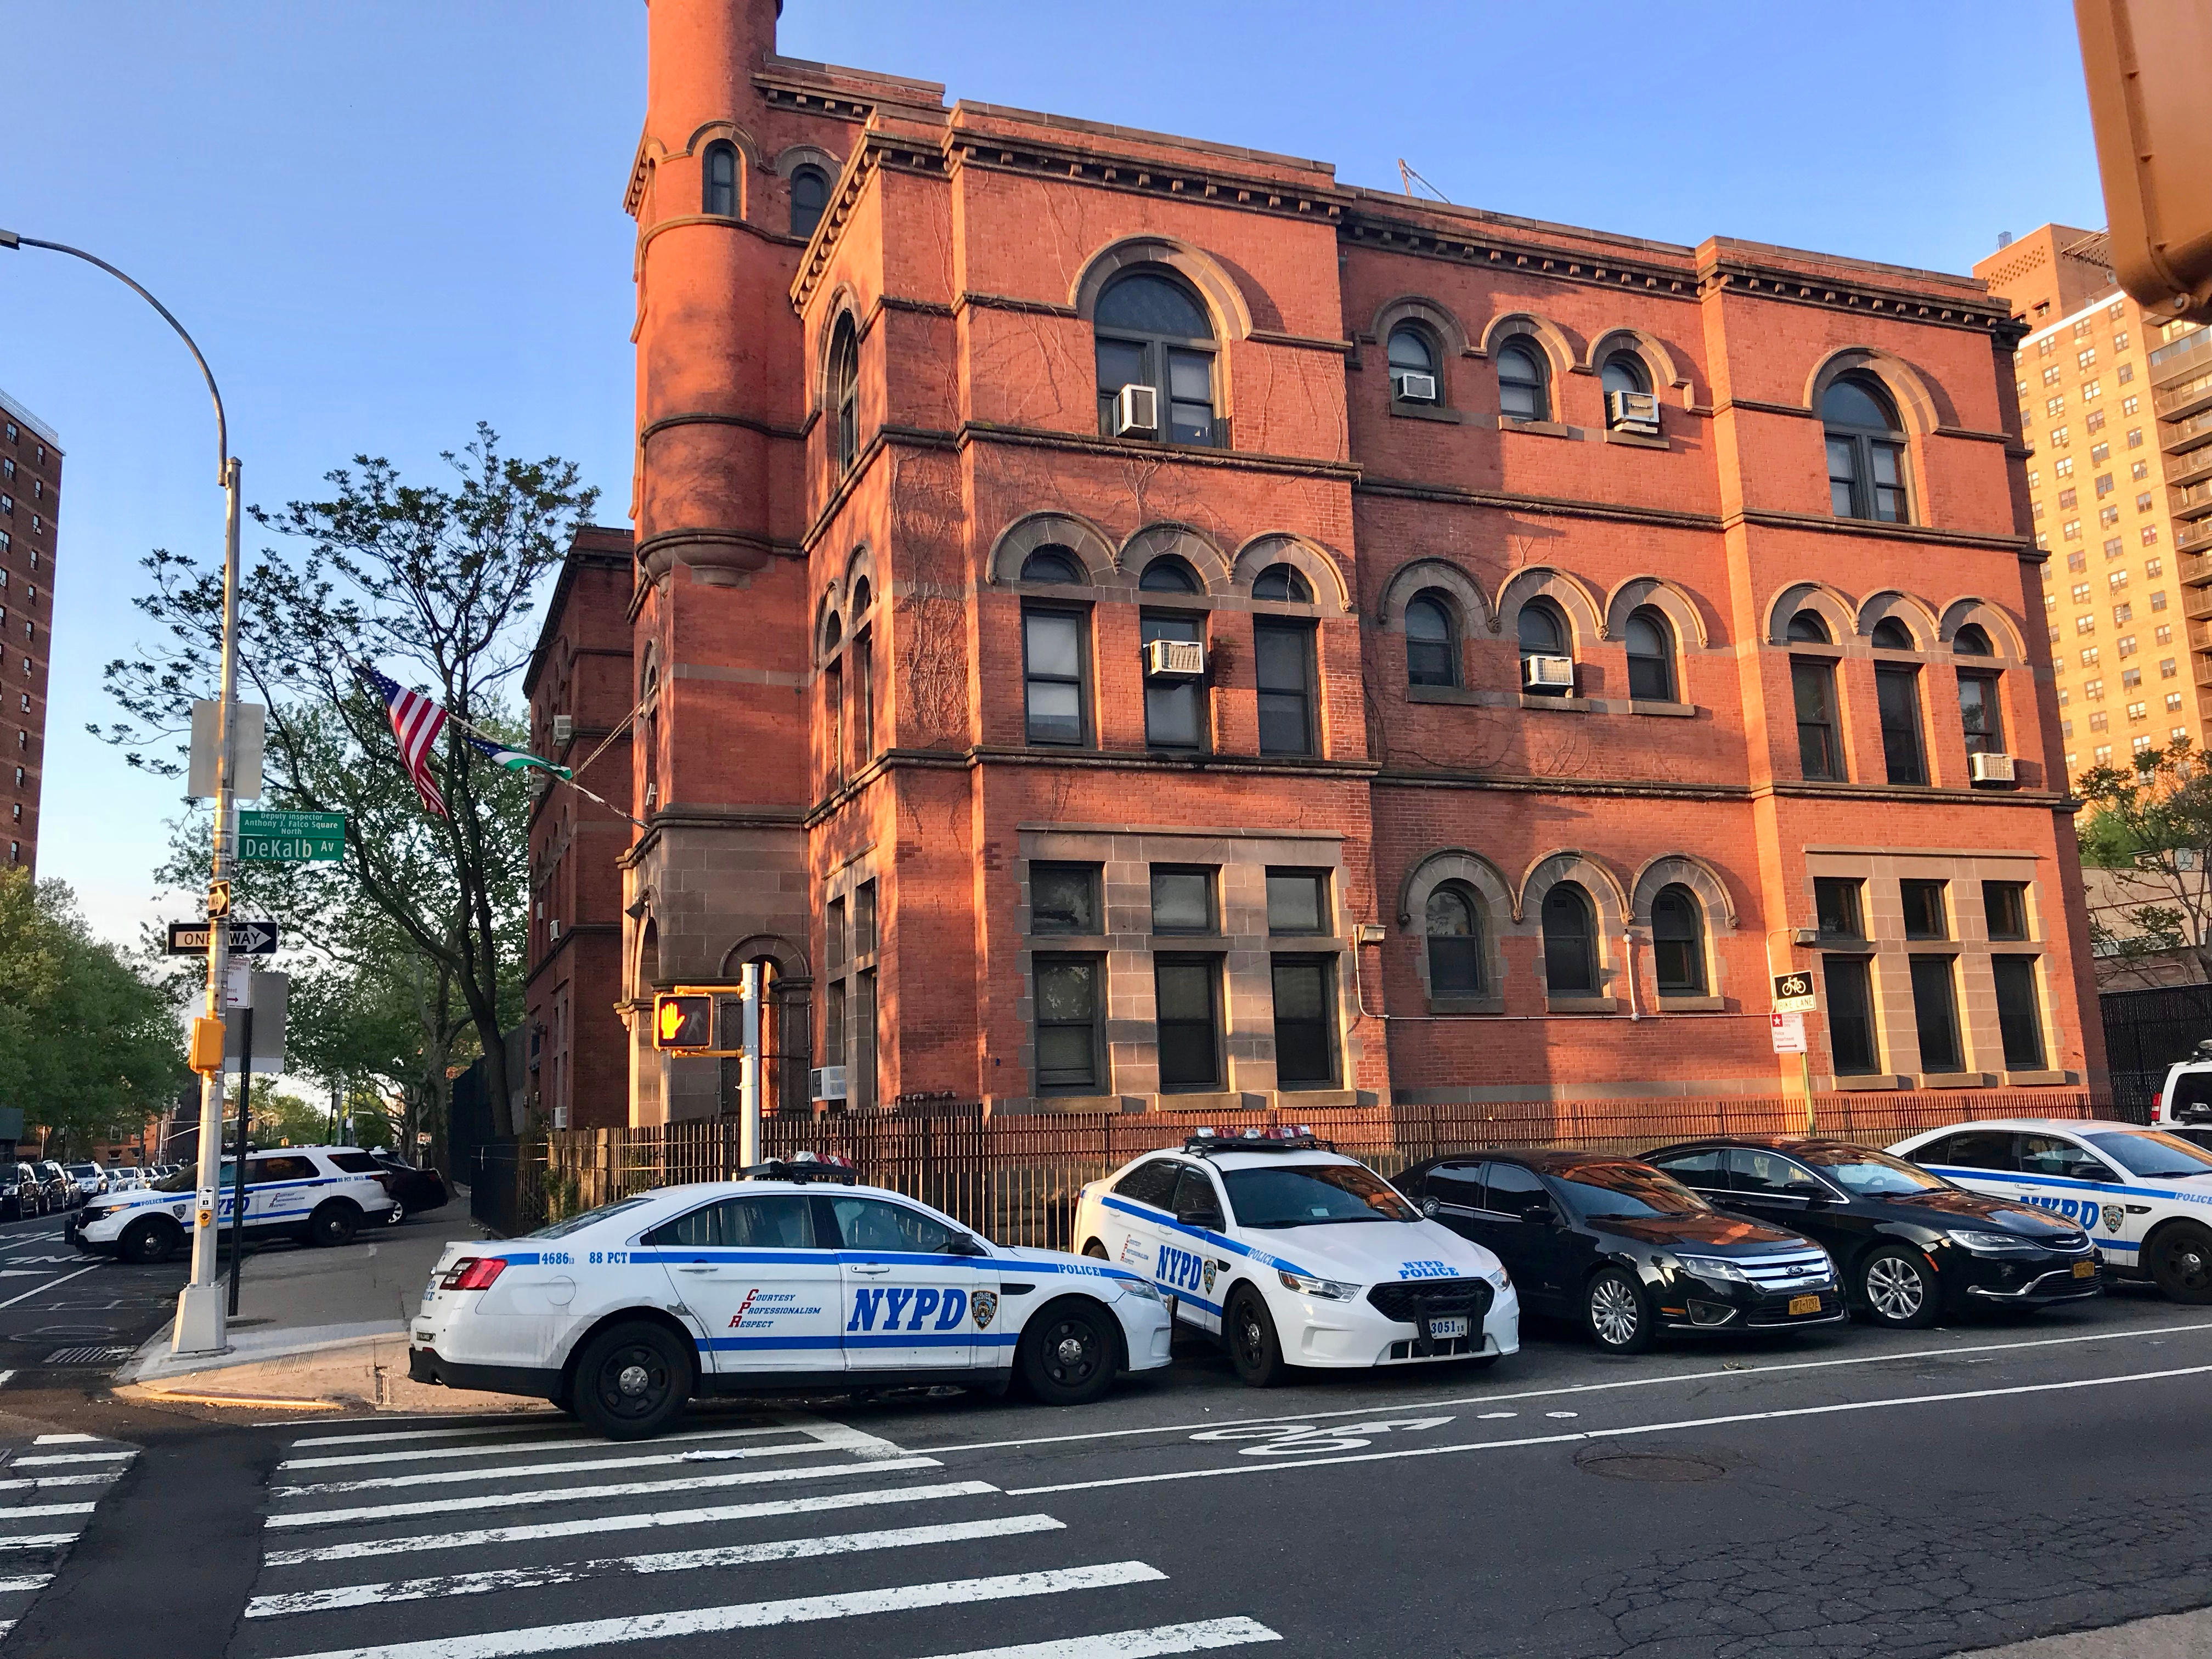 New York City Police Department 88th Precint, Brooklyn - Police station at the corner of Classon Avenue and Dekalb Avenue with several police interceptors parked in front of the building - NYC, USA | Source: Shutterstock